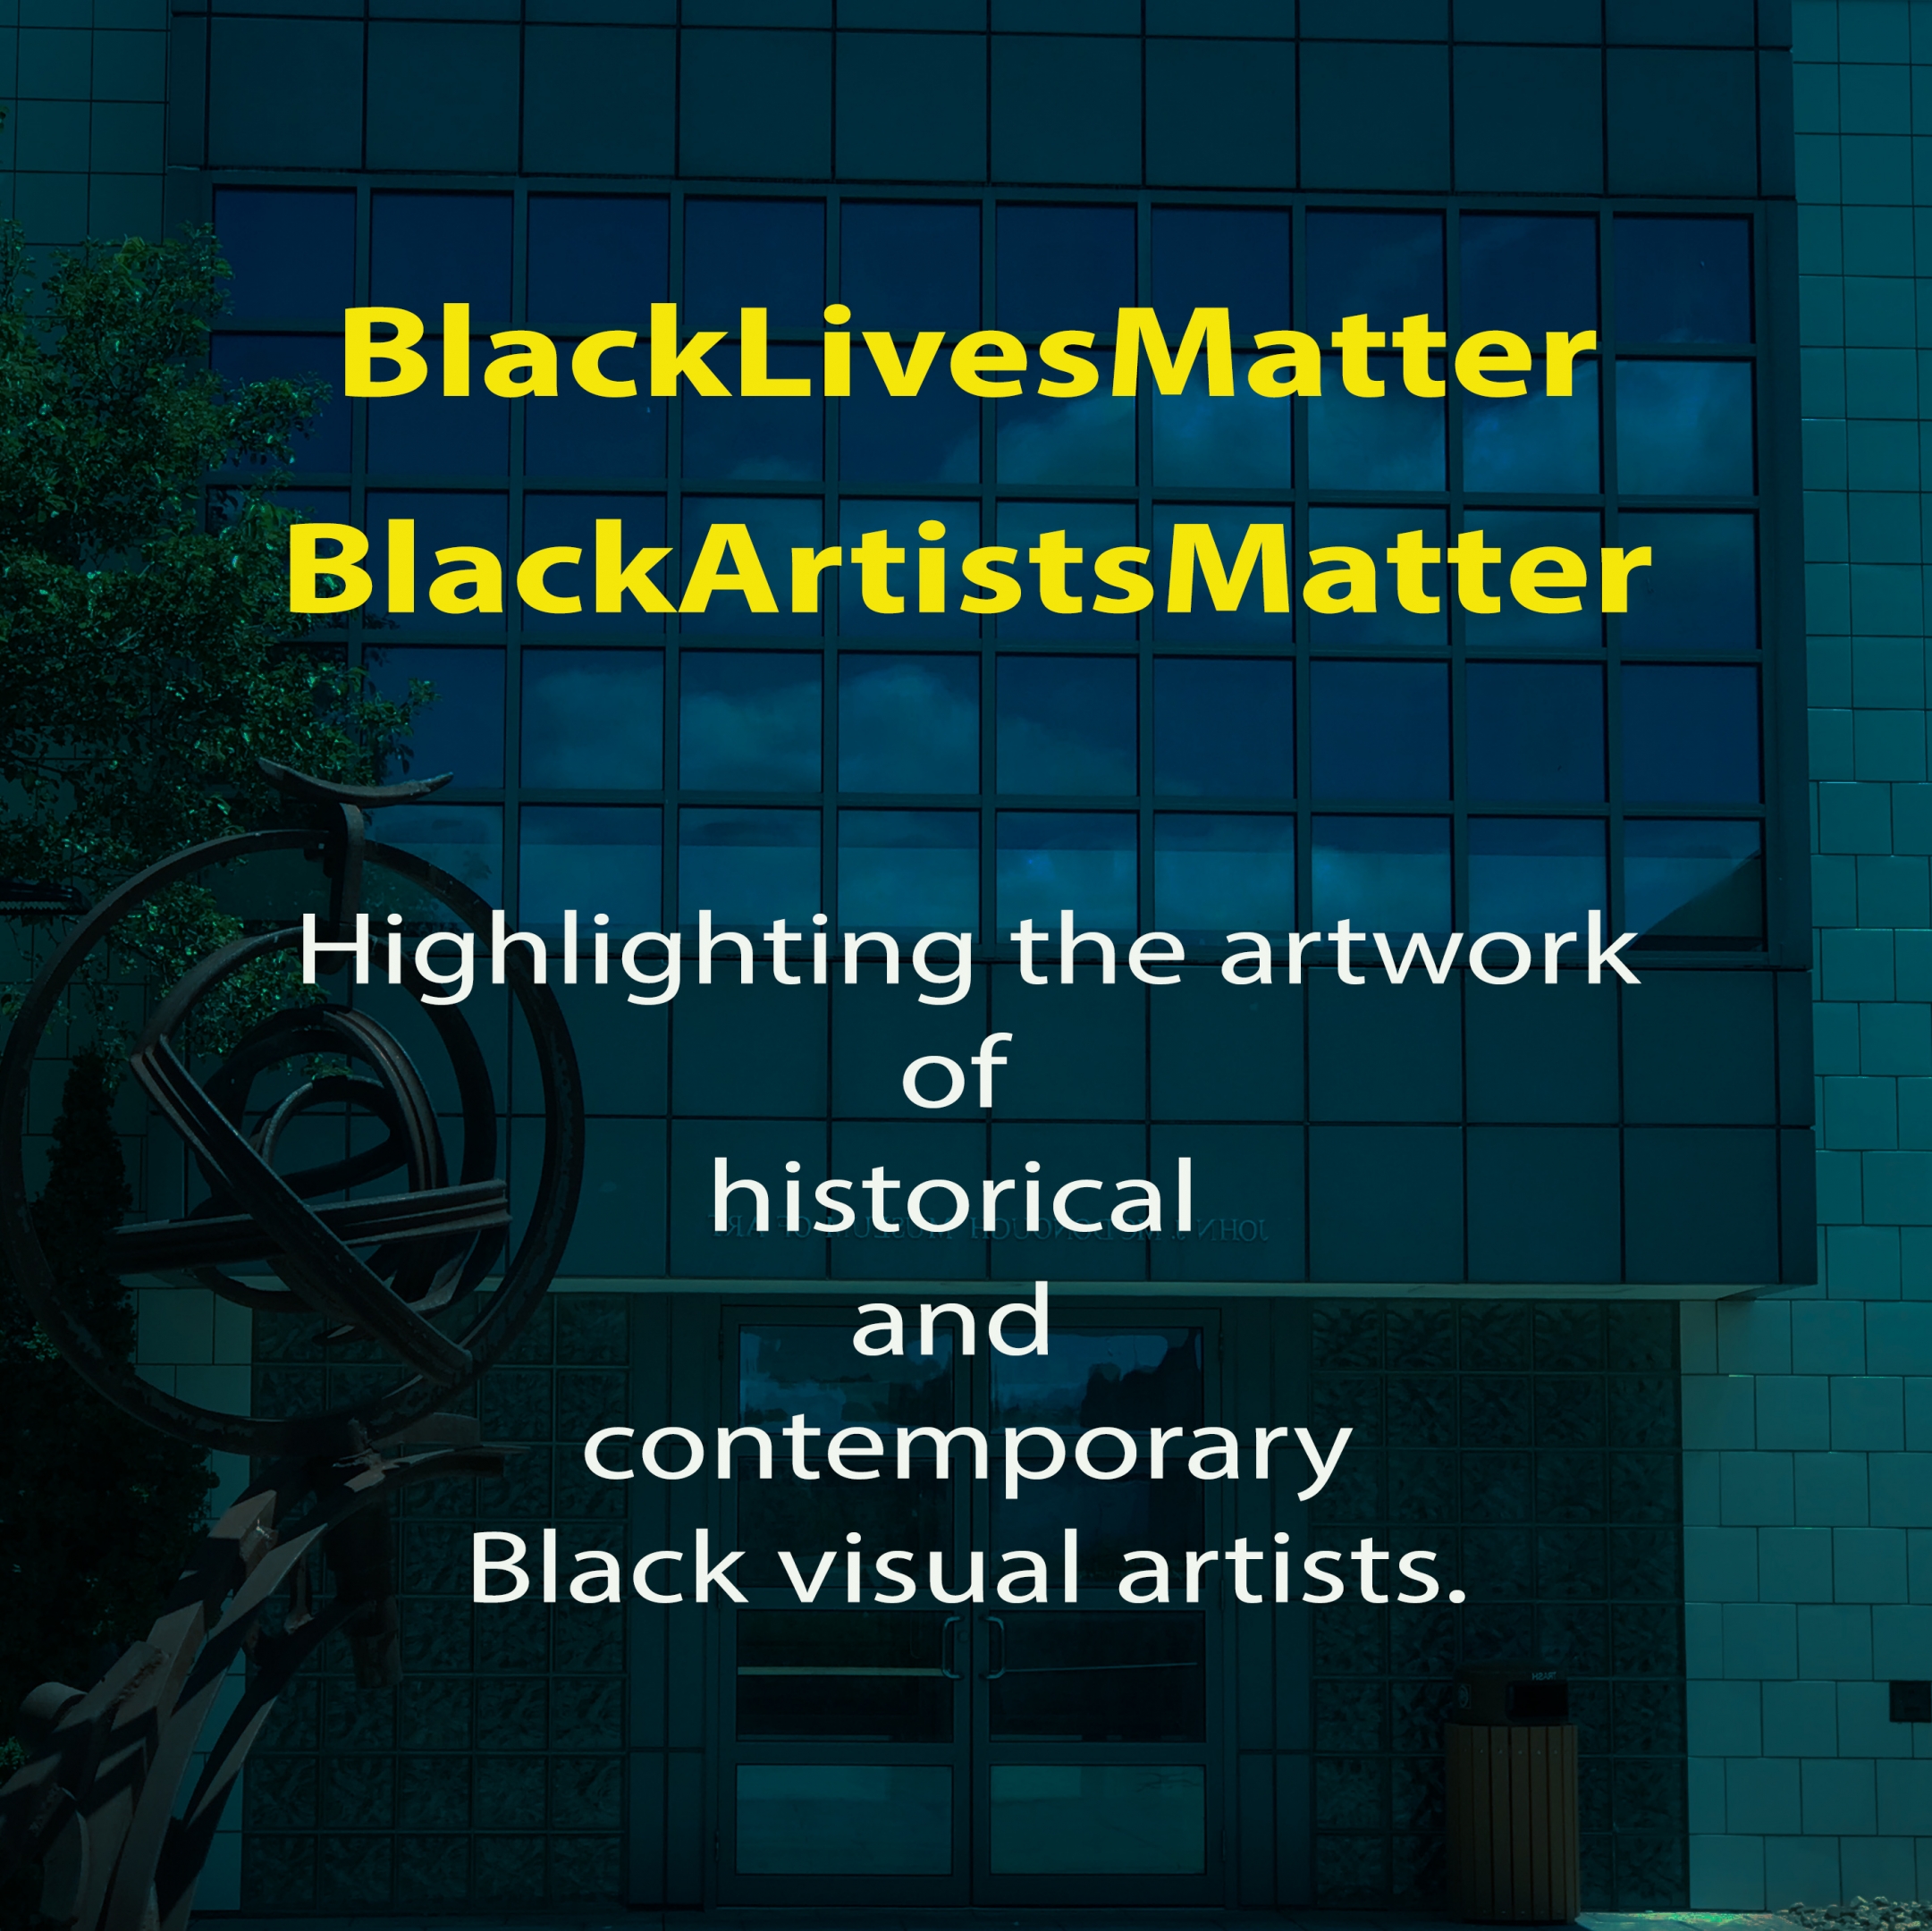 Black Artists Matter.Highlighting the artwork of historical and contemporary Black visual artists.